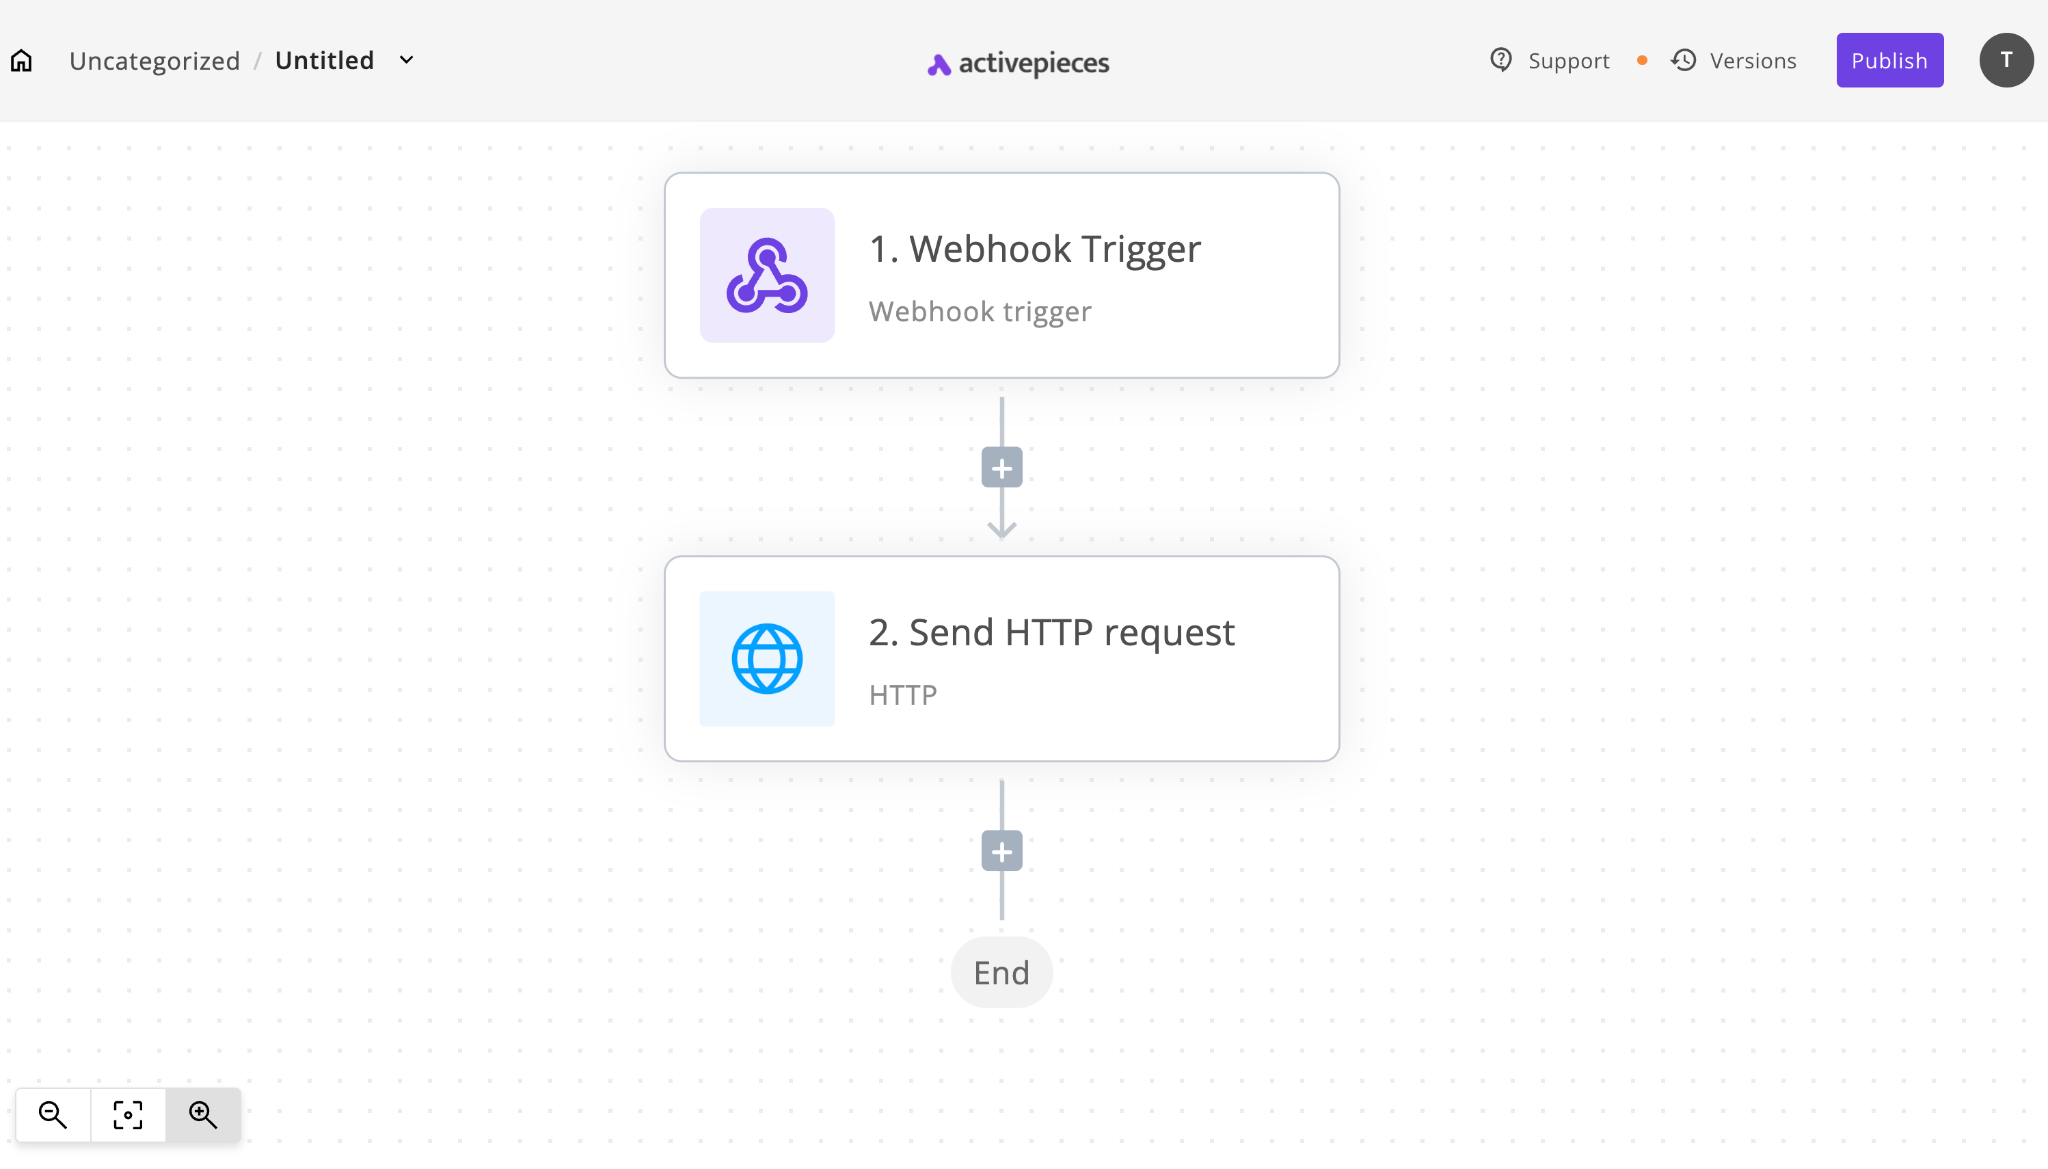 Webhooks and HTTP app in Activepieces